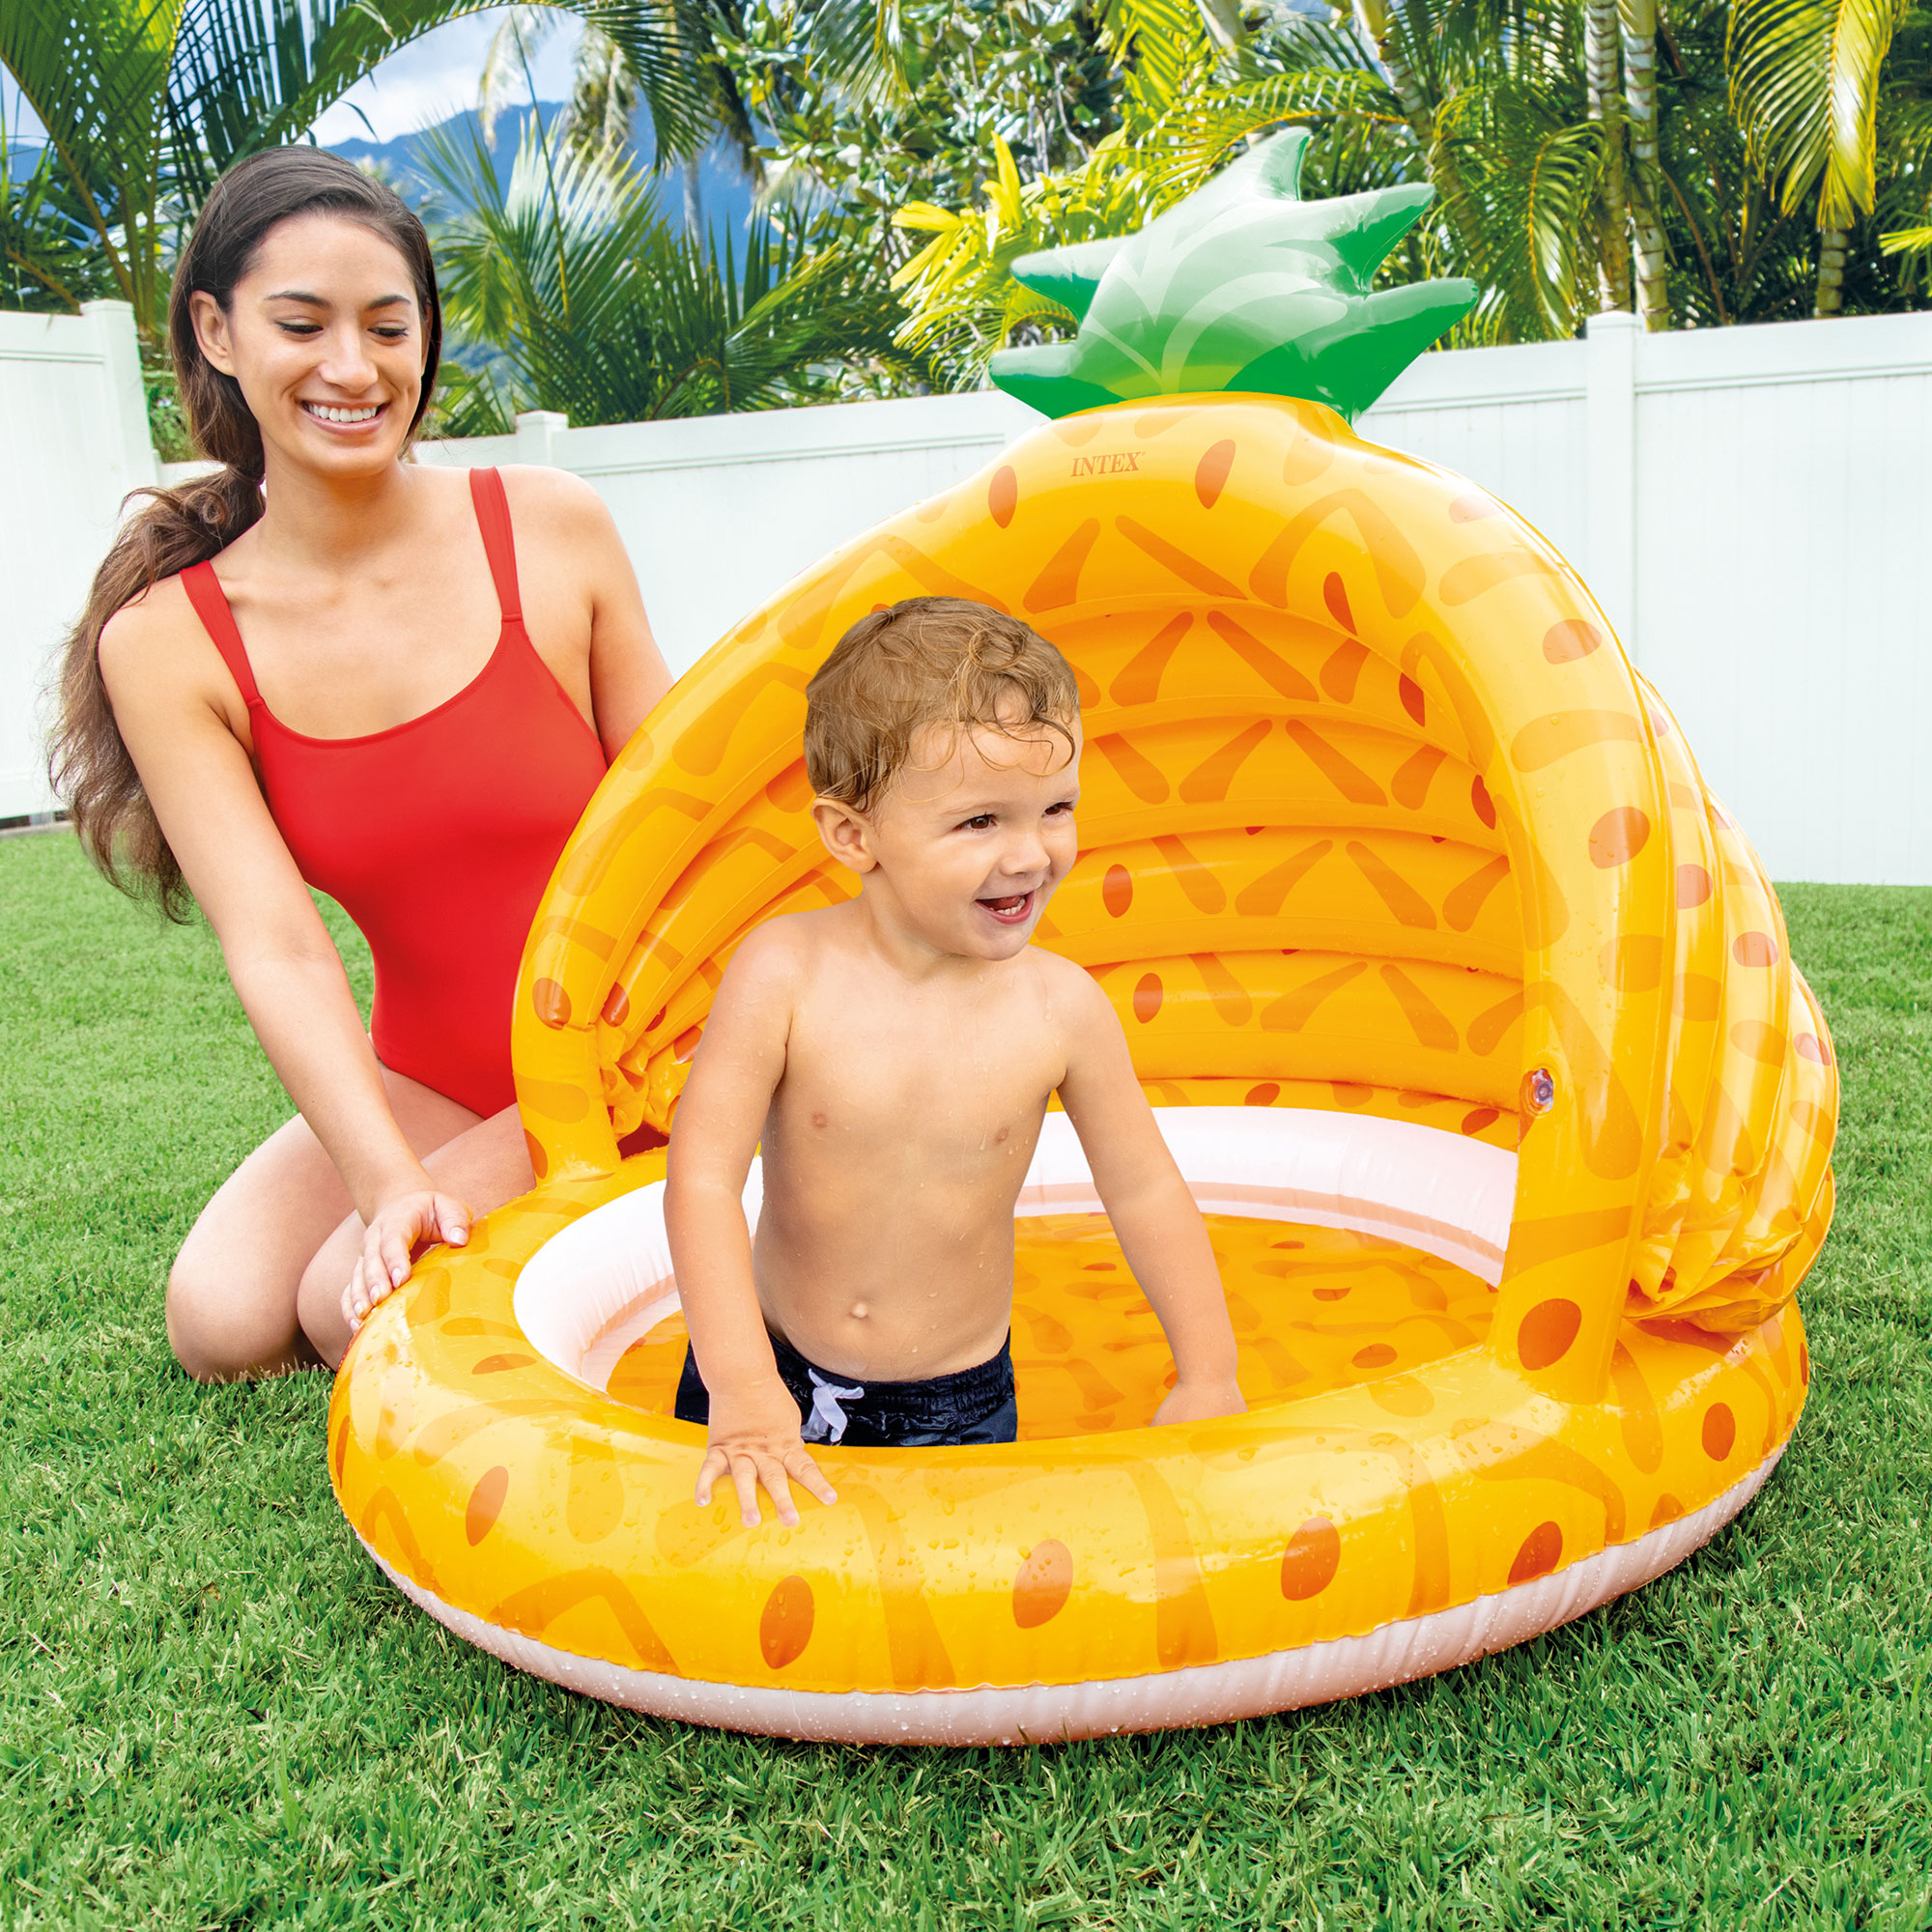 Intex 58414EP 40 Inch Pineapple Outdoor Baby Toddler Inflatable Swimming Pool - image 3 of 3